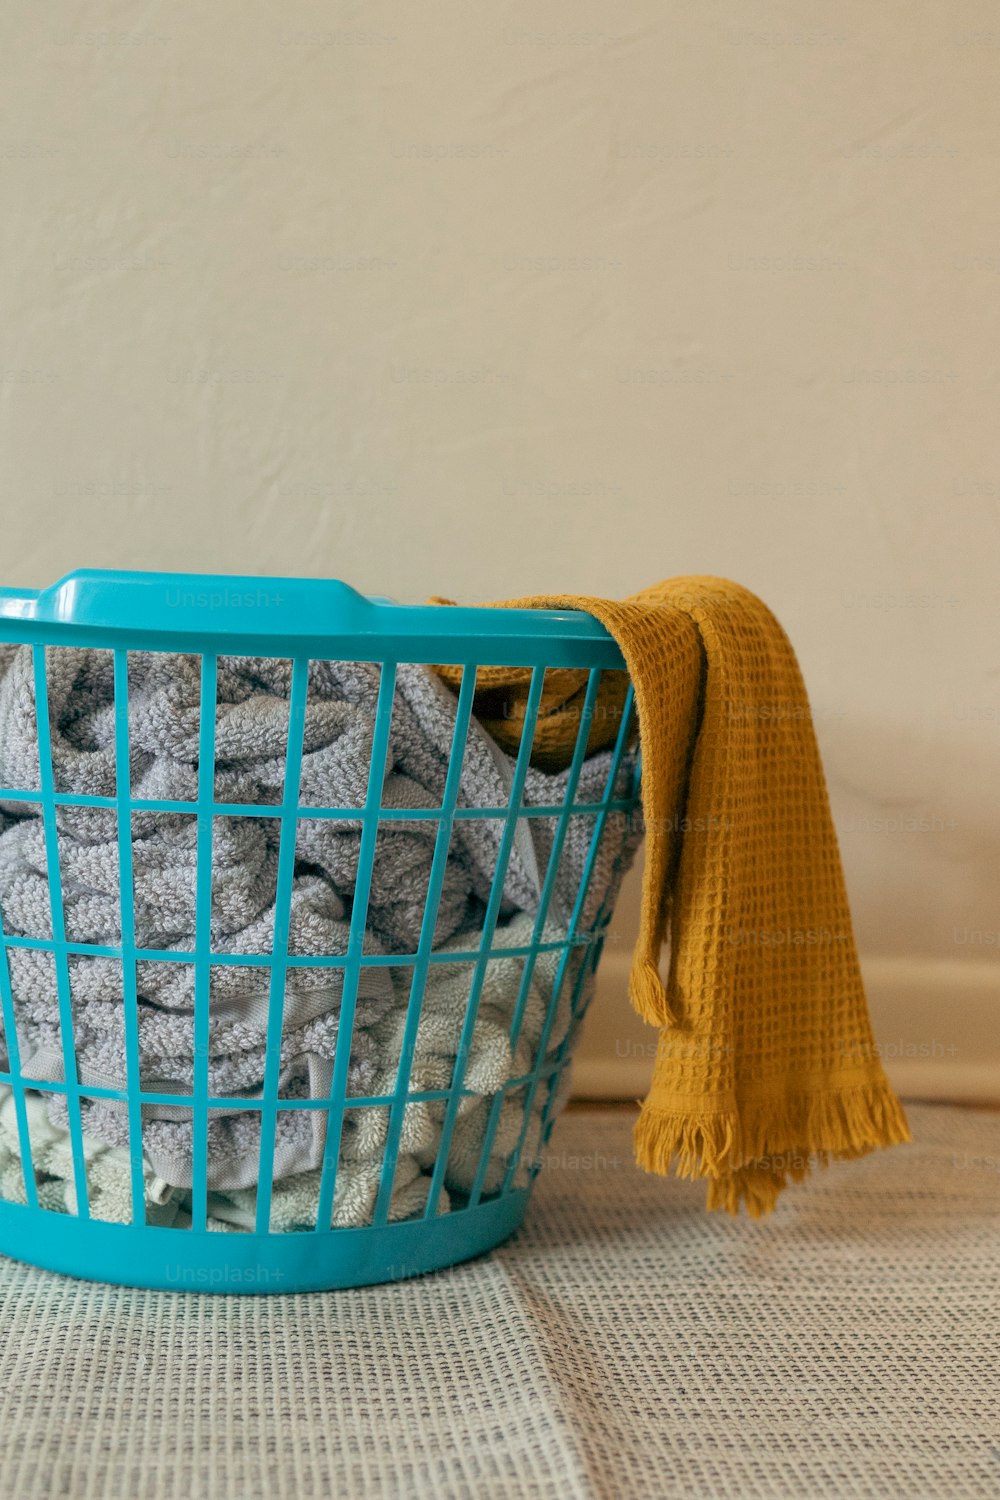 a blue basket filled with blankets on top of a table